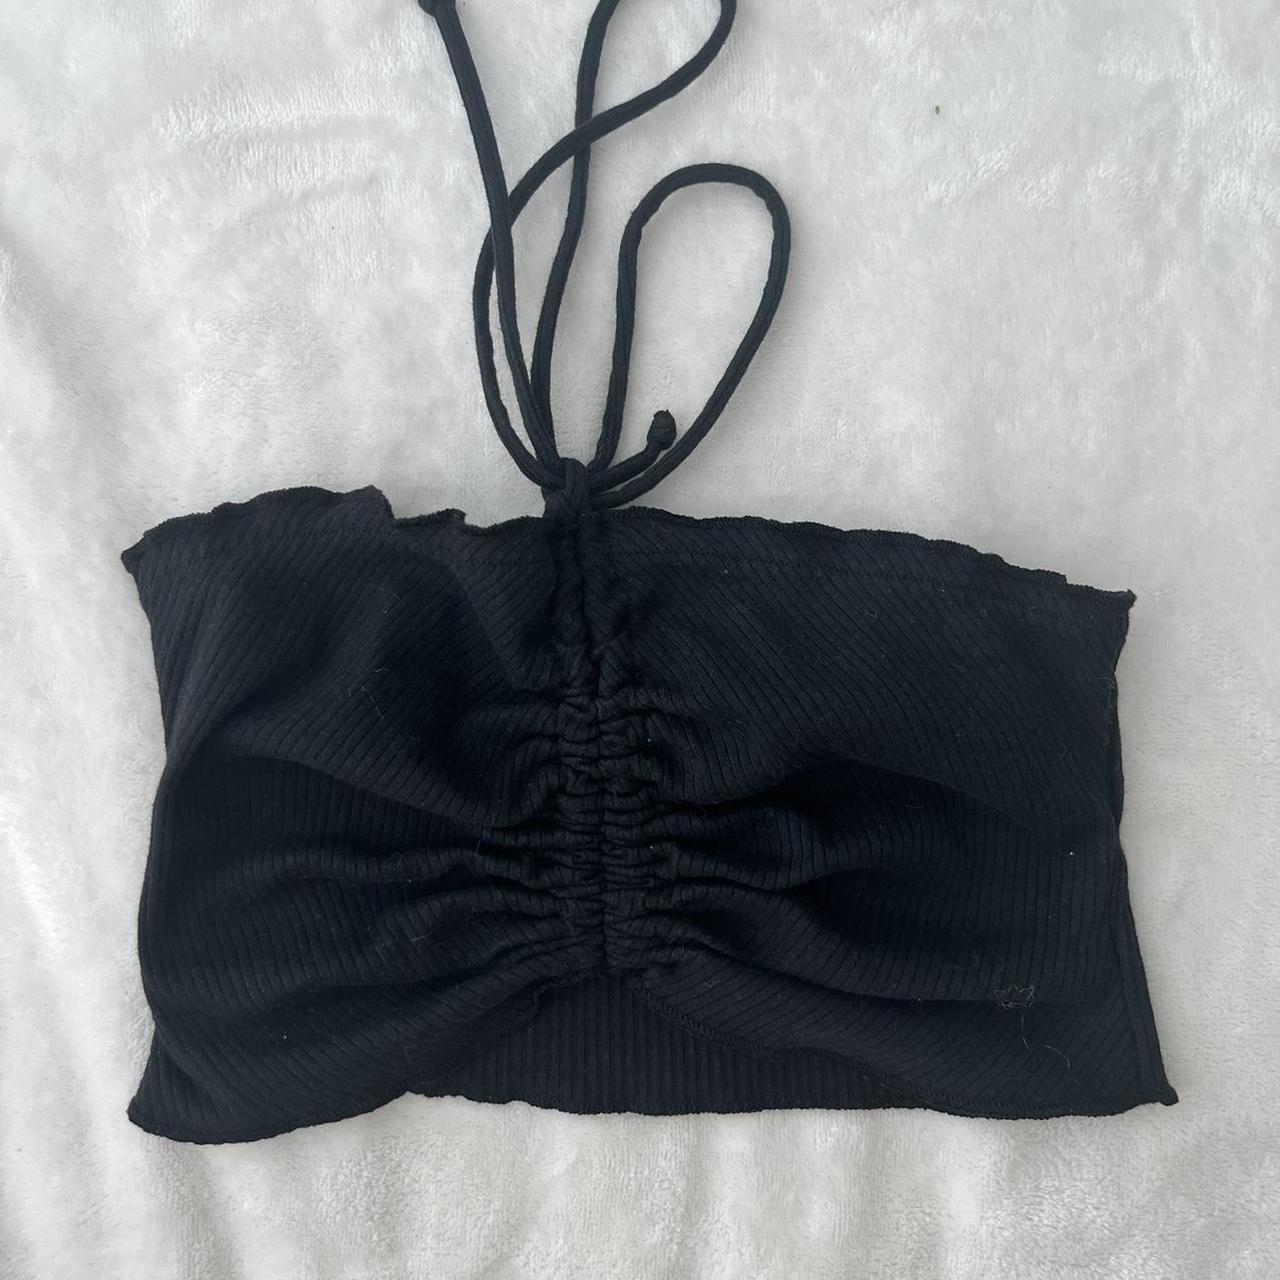 Urban outfitters adjustable bra top. Tie can double - Depop